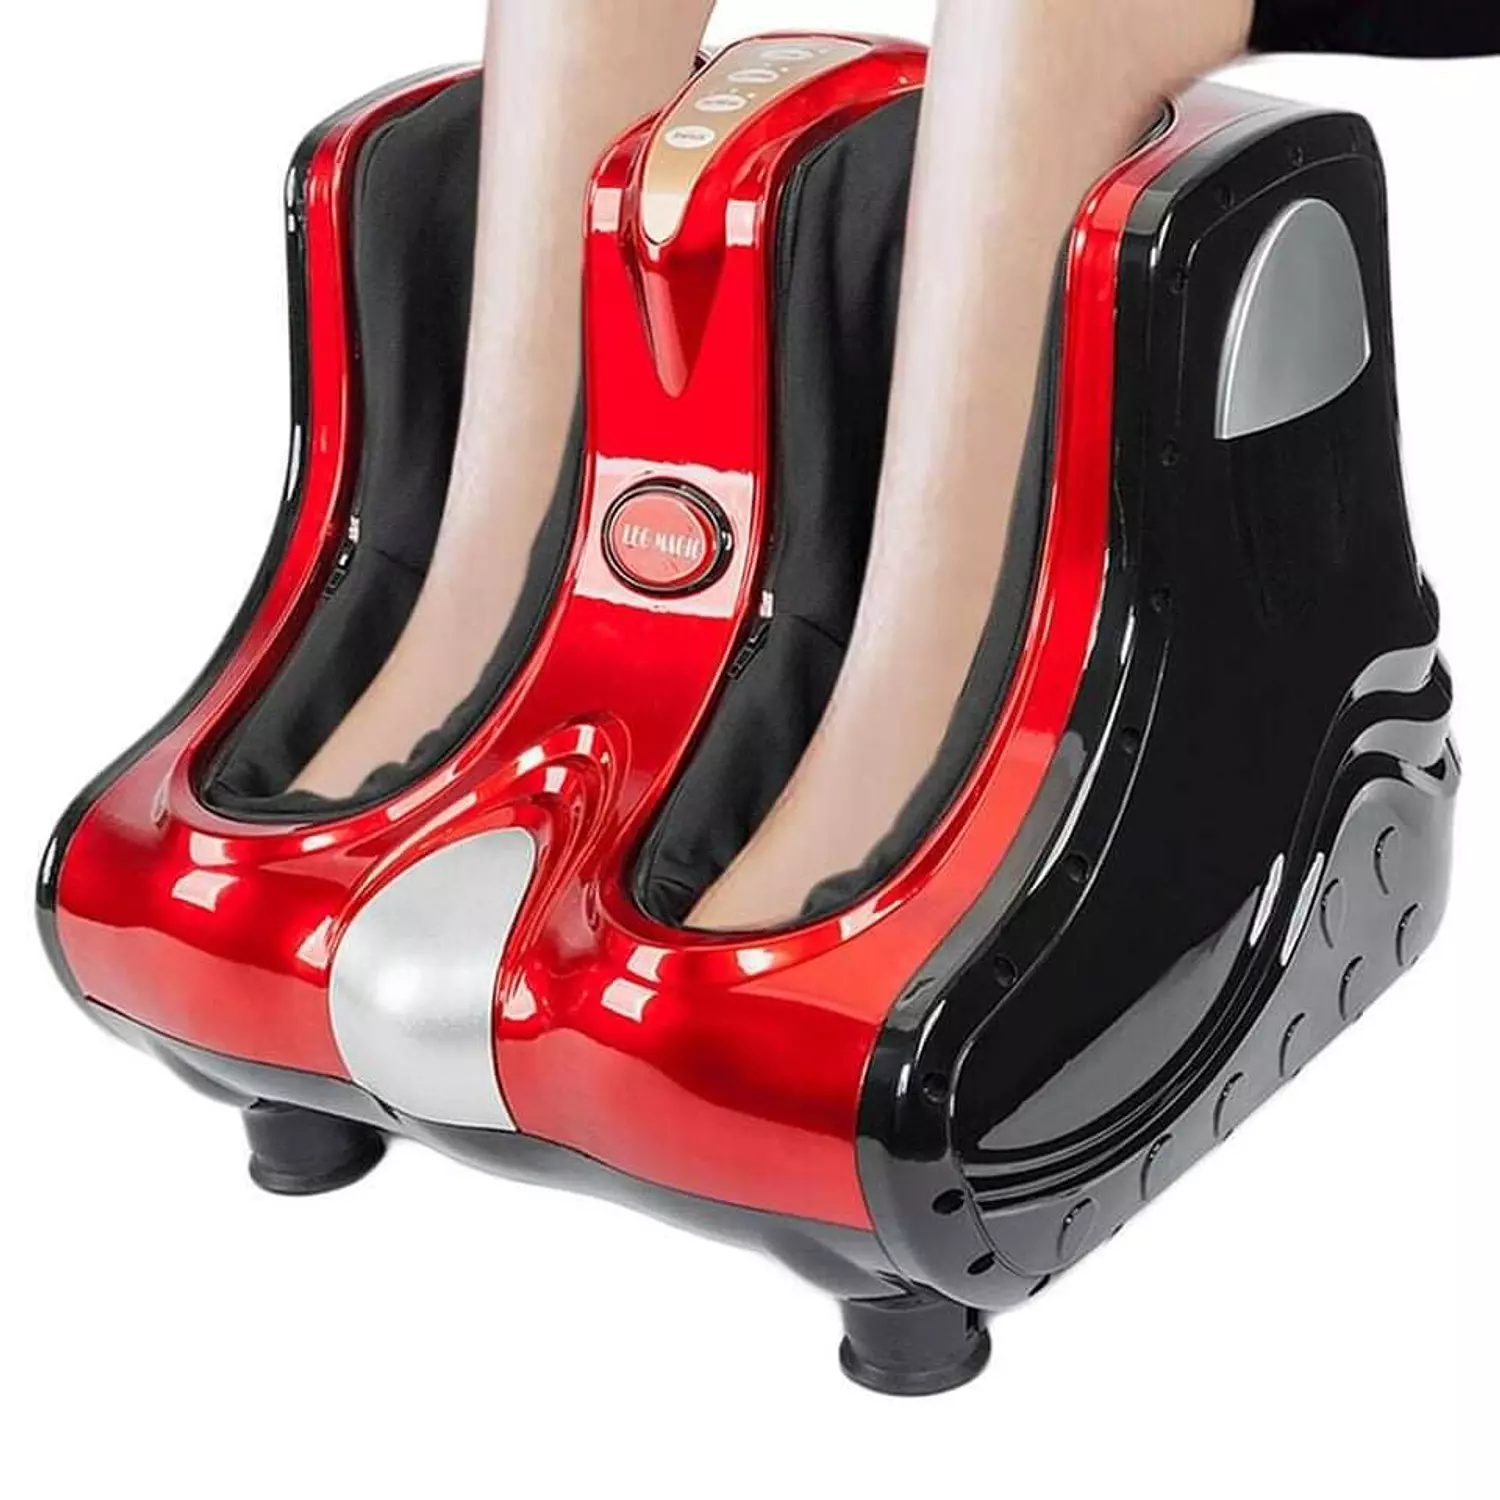  Picture of Foot and leg massager Picture of Foot and leg massager Foot and leg massager-2nd-img